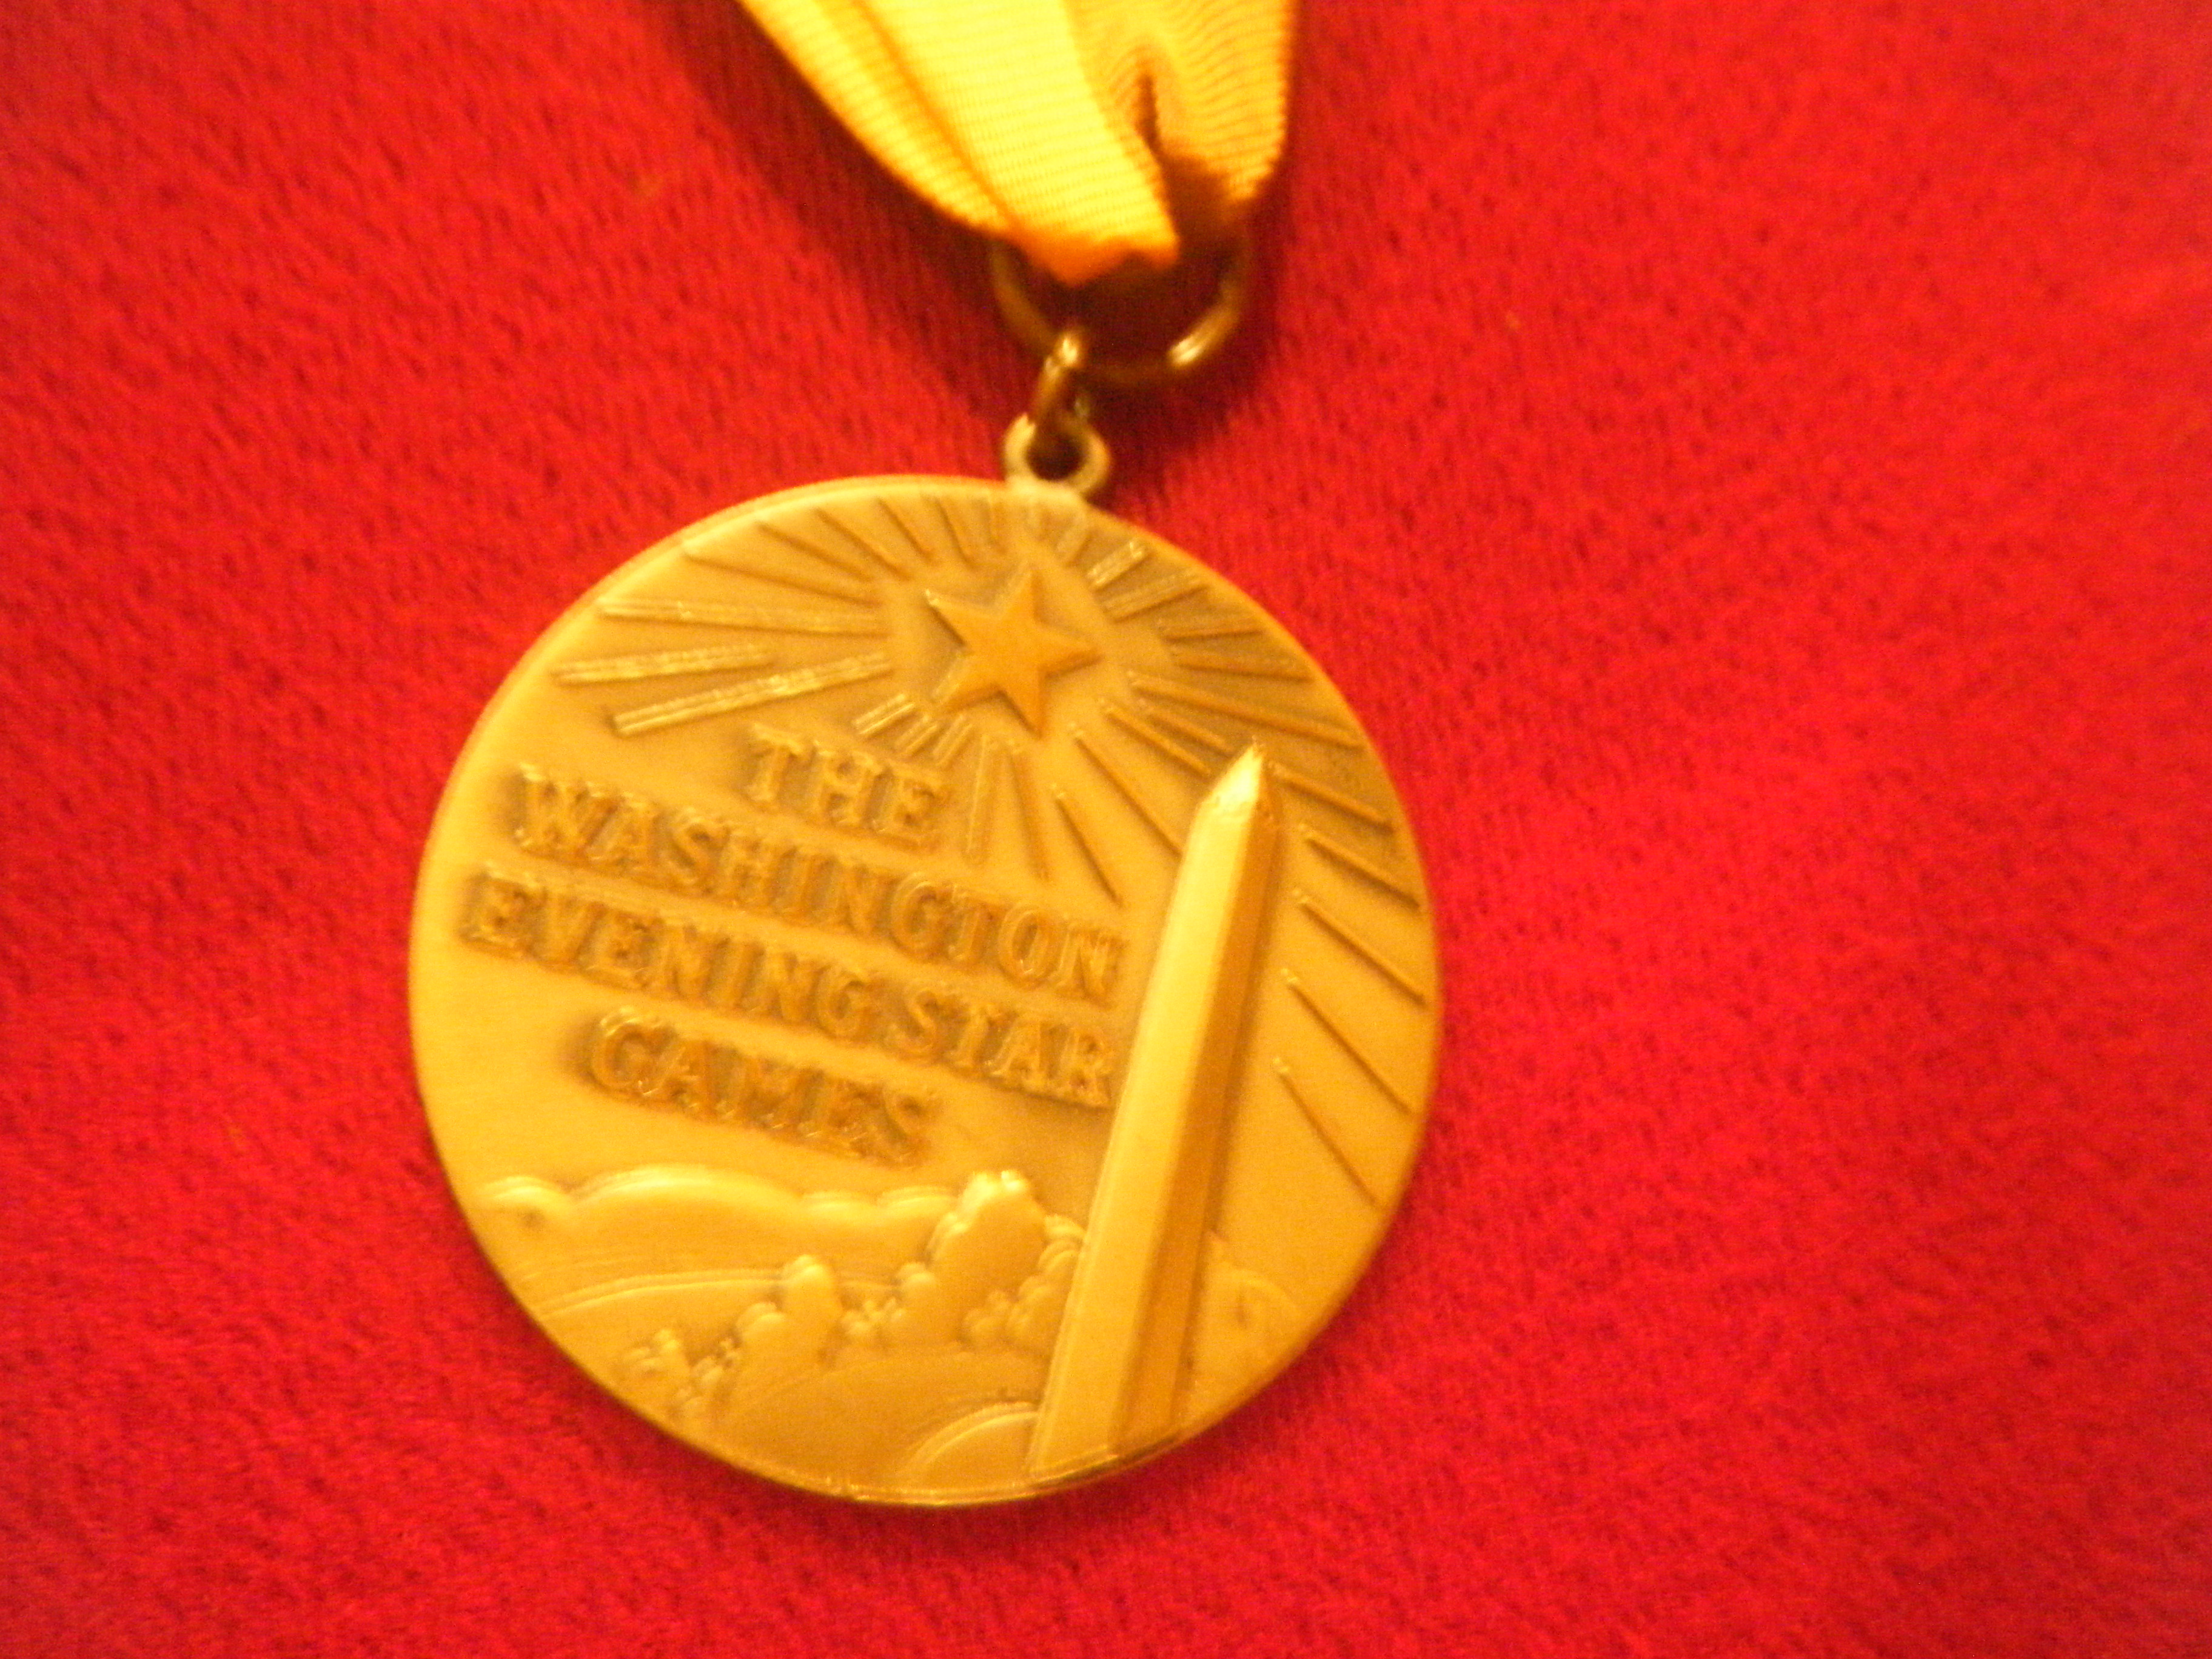 Track and Field Medal 